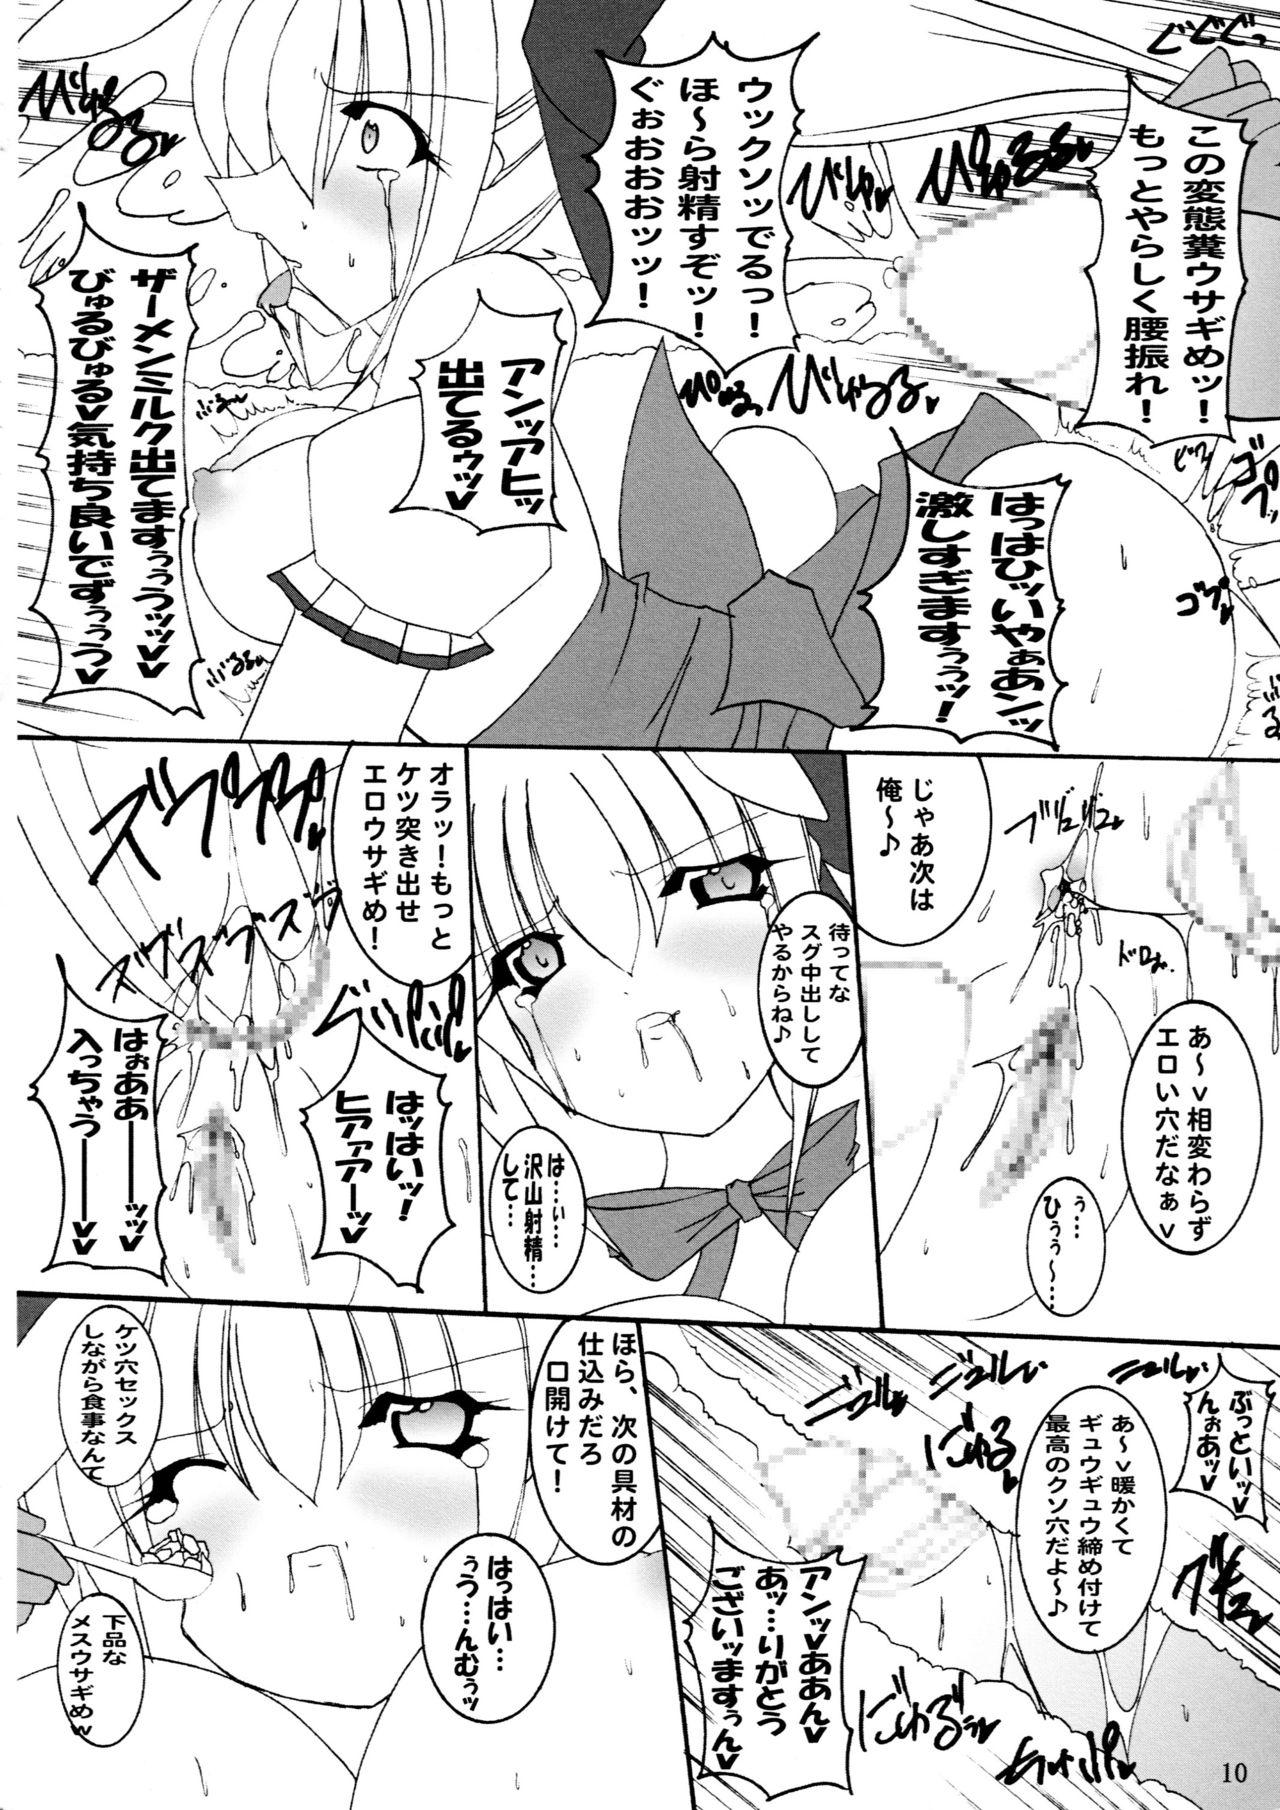 Gets Hitori Twintail & Abnormal Carnival - Di gi charat Assfingering - Page 11